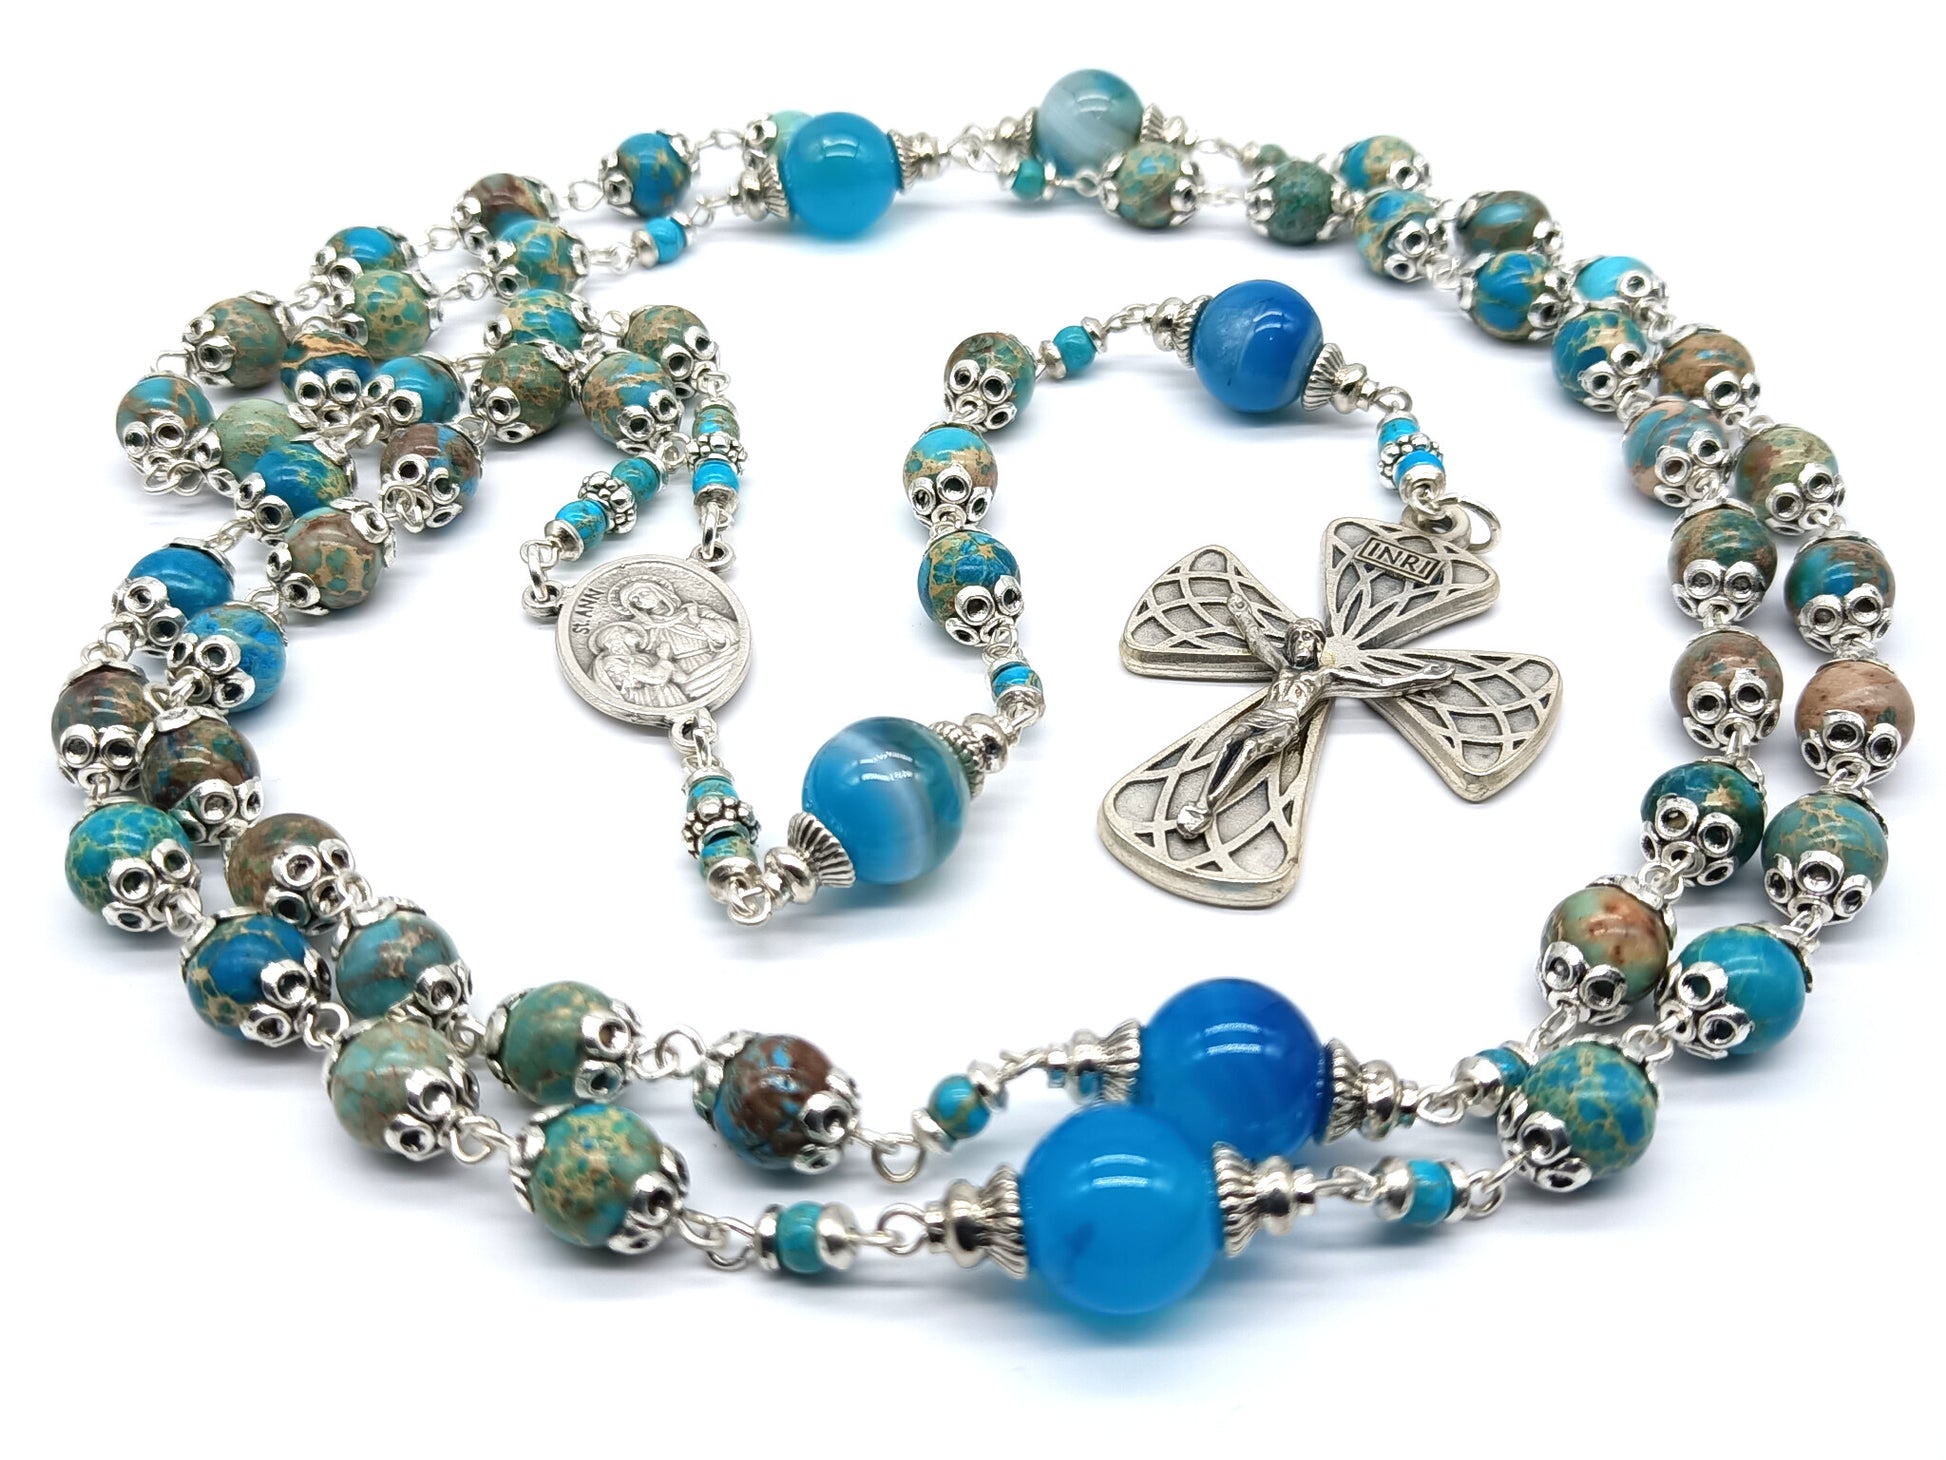 Saint Ann unique rosary beads with gemstone beads, silver crucifix, centre medal and blue glass pater beads.